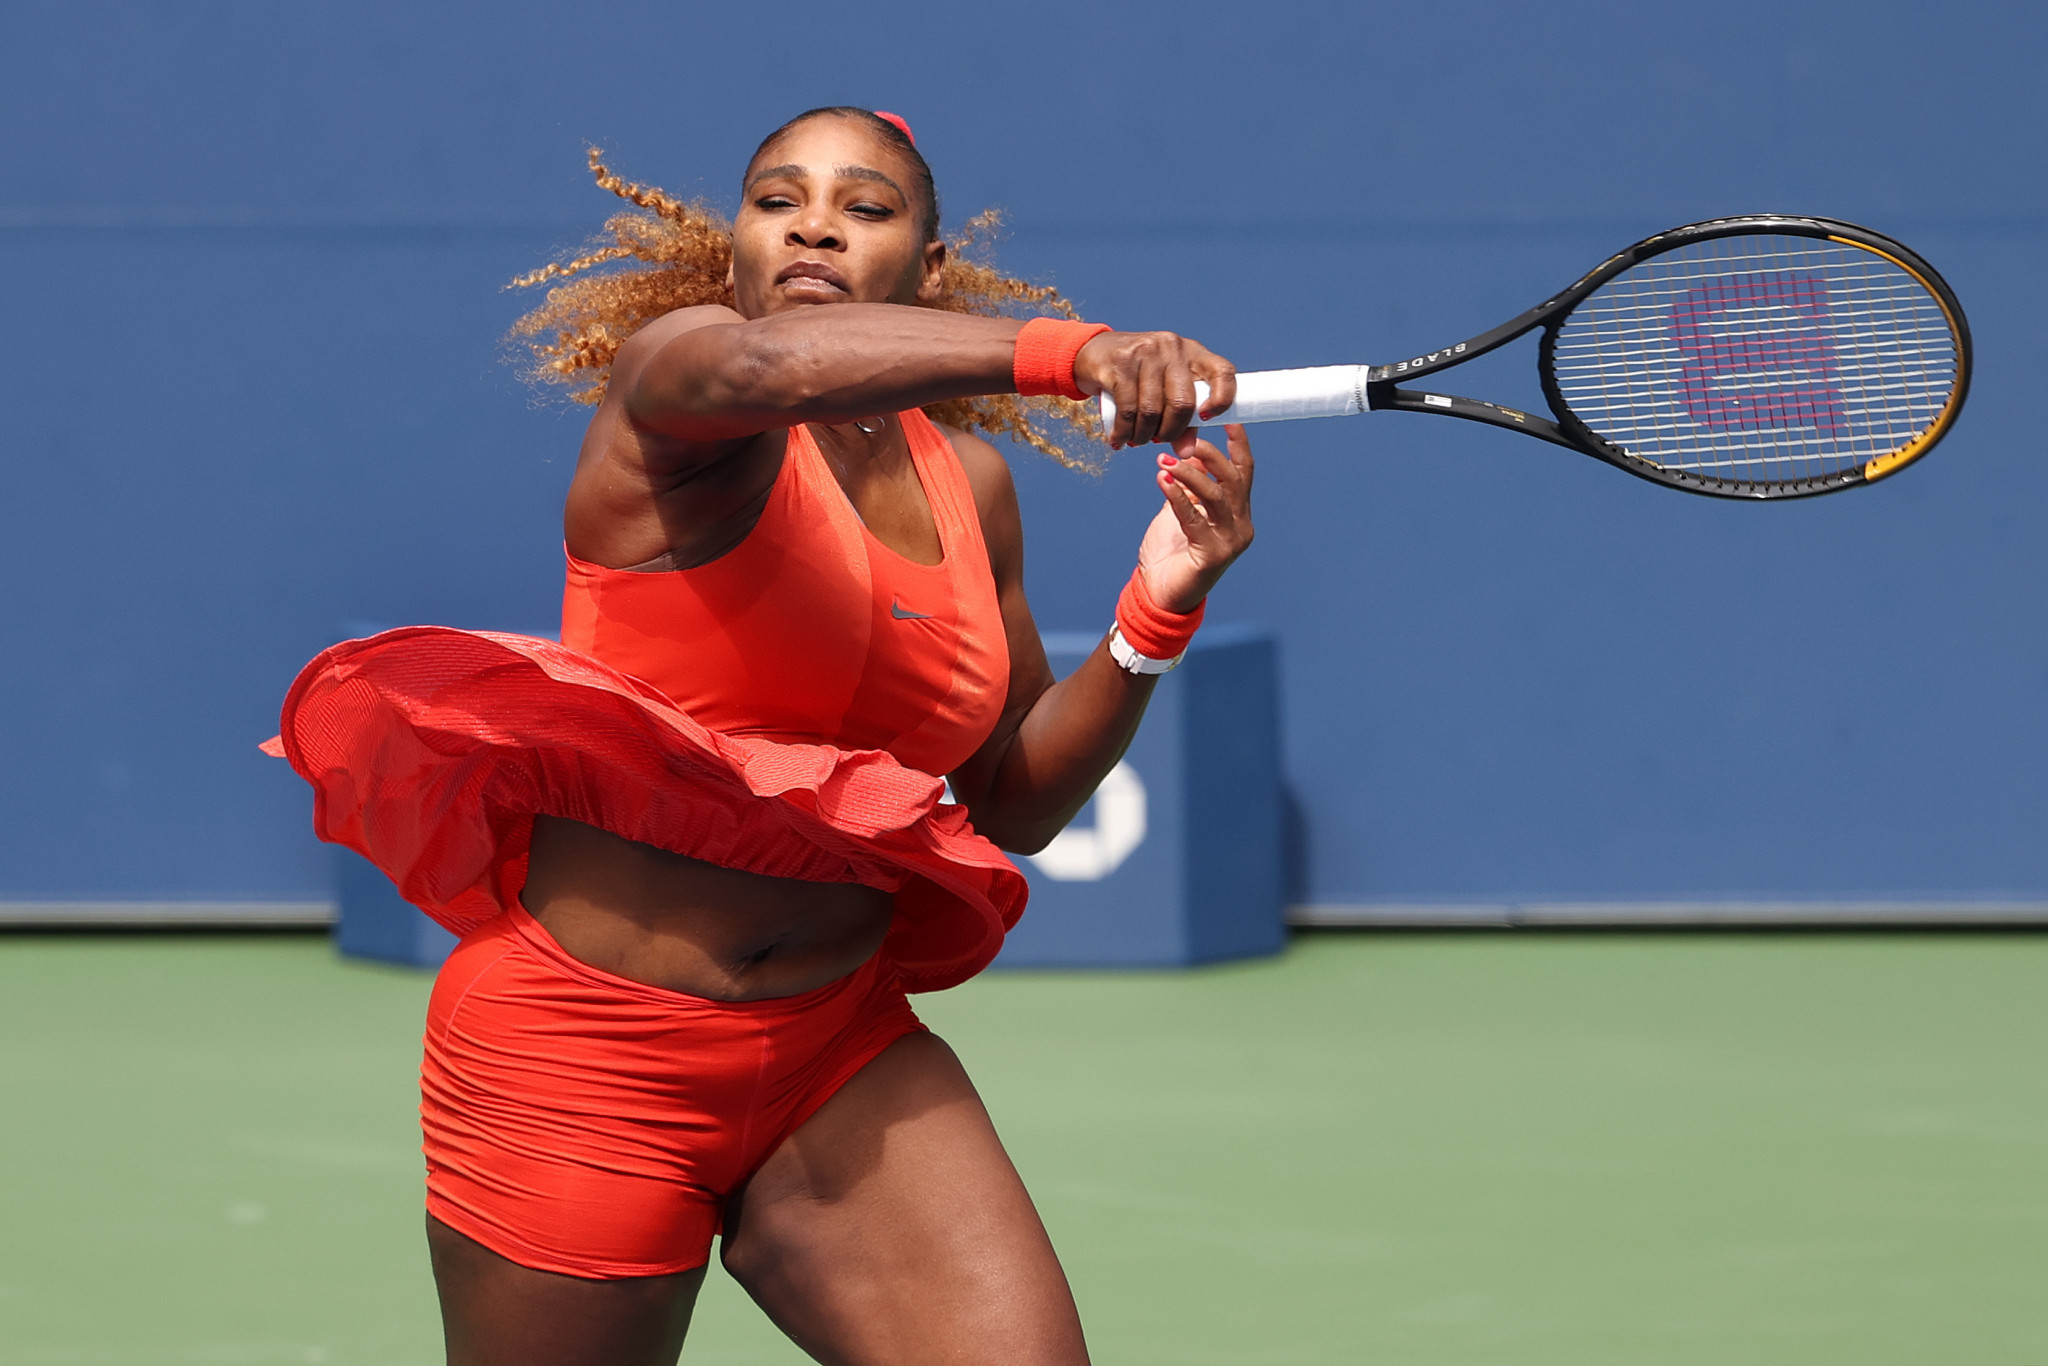 Serena Williams continued her quest for Grand Slam number 24 as she beat Tsvetana Pironkova in three sets at the US Open ©Getty Images